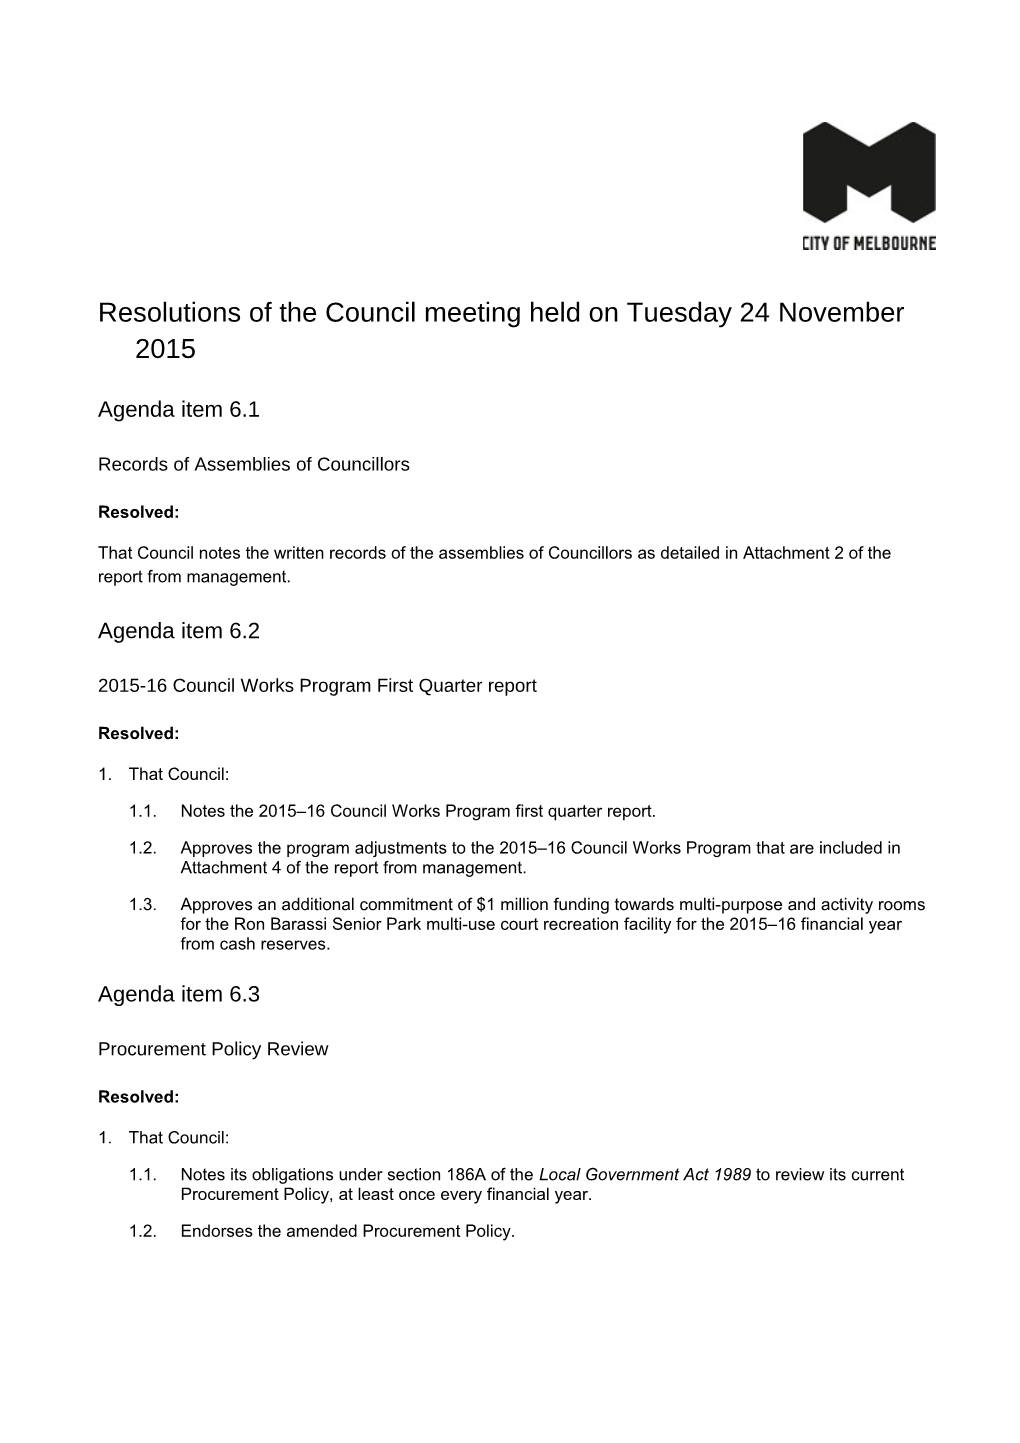 Resolutions of the Council Meeting Held on Tuesday 24 November 2015